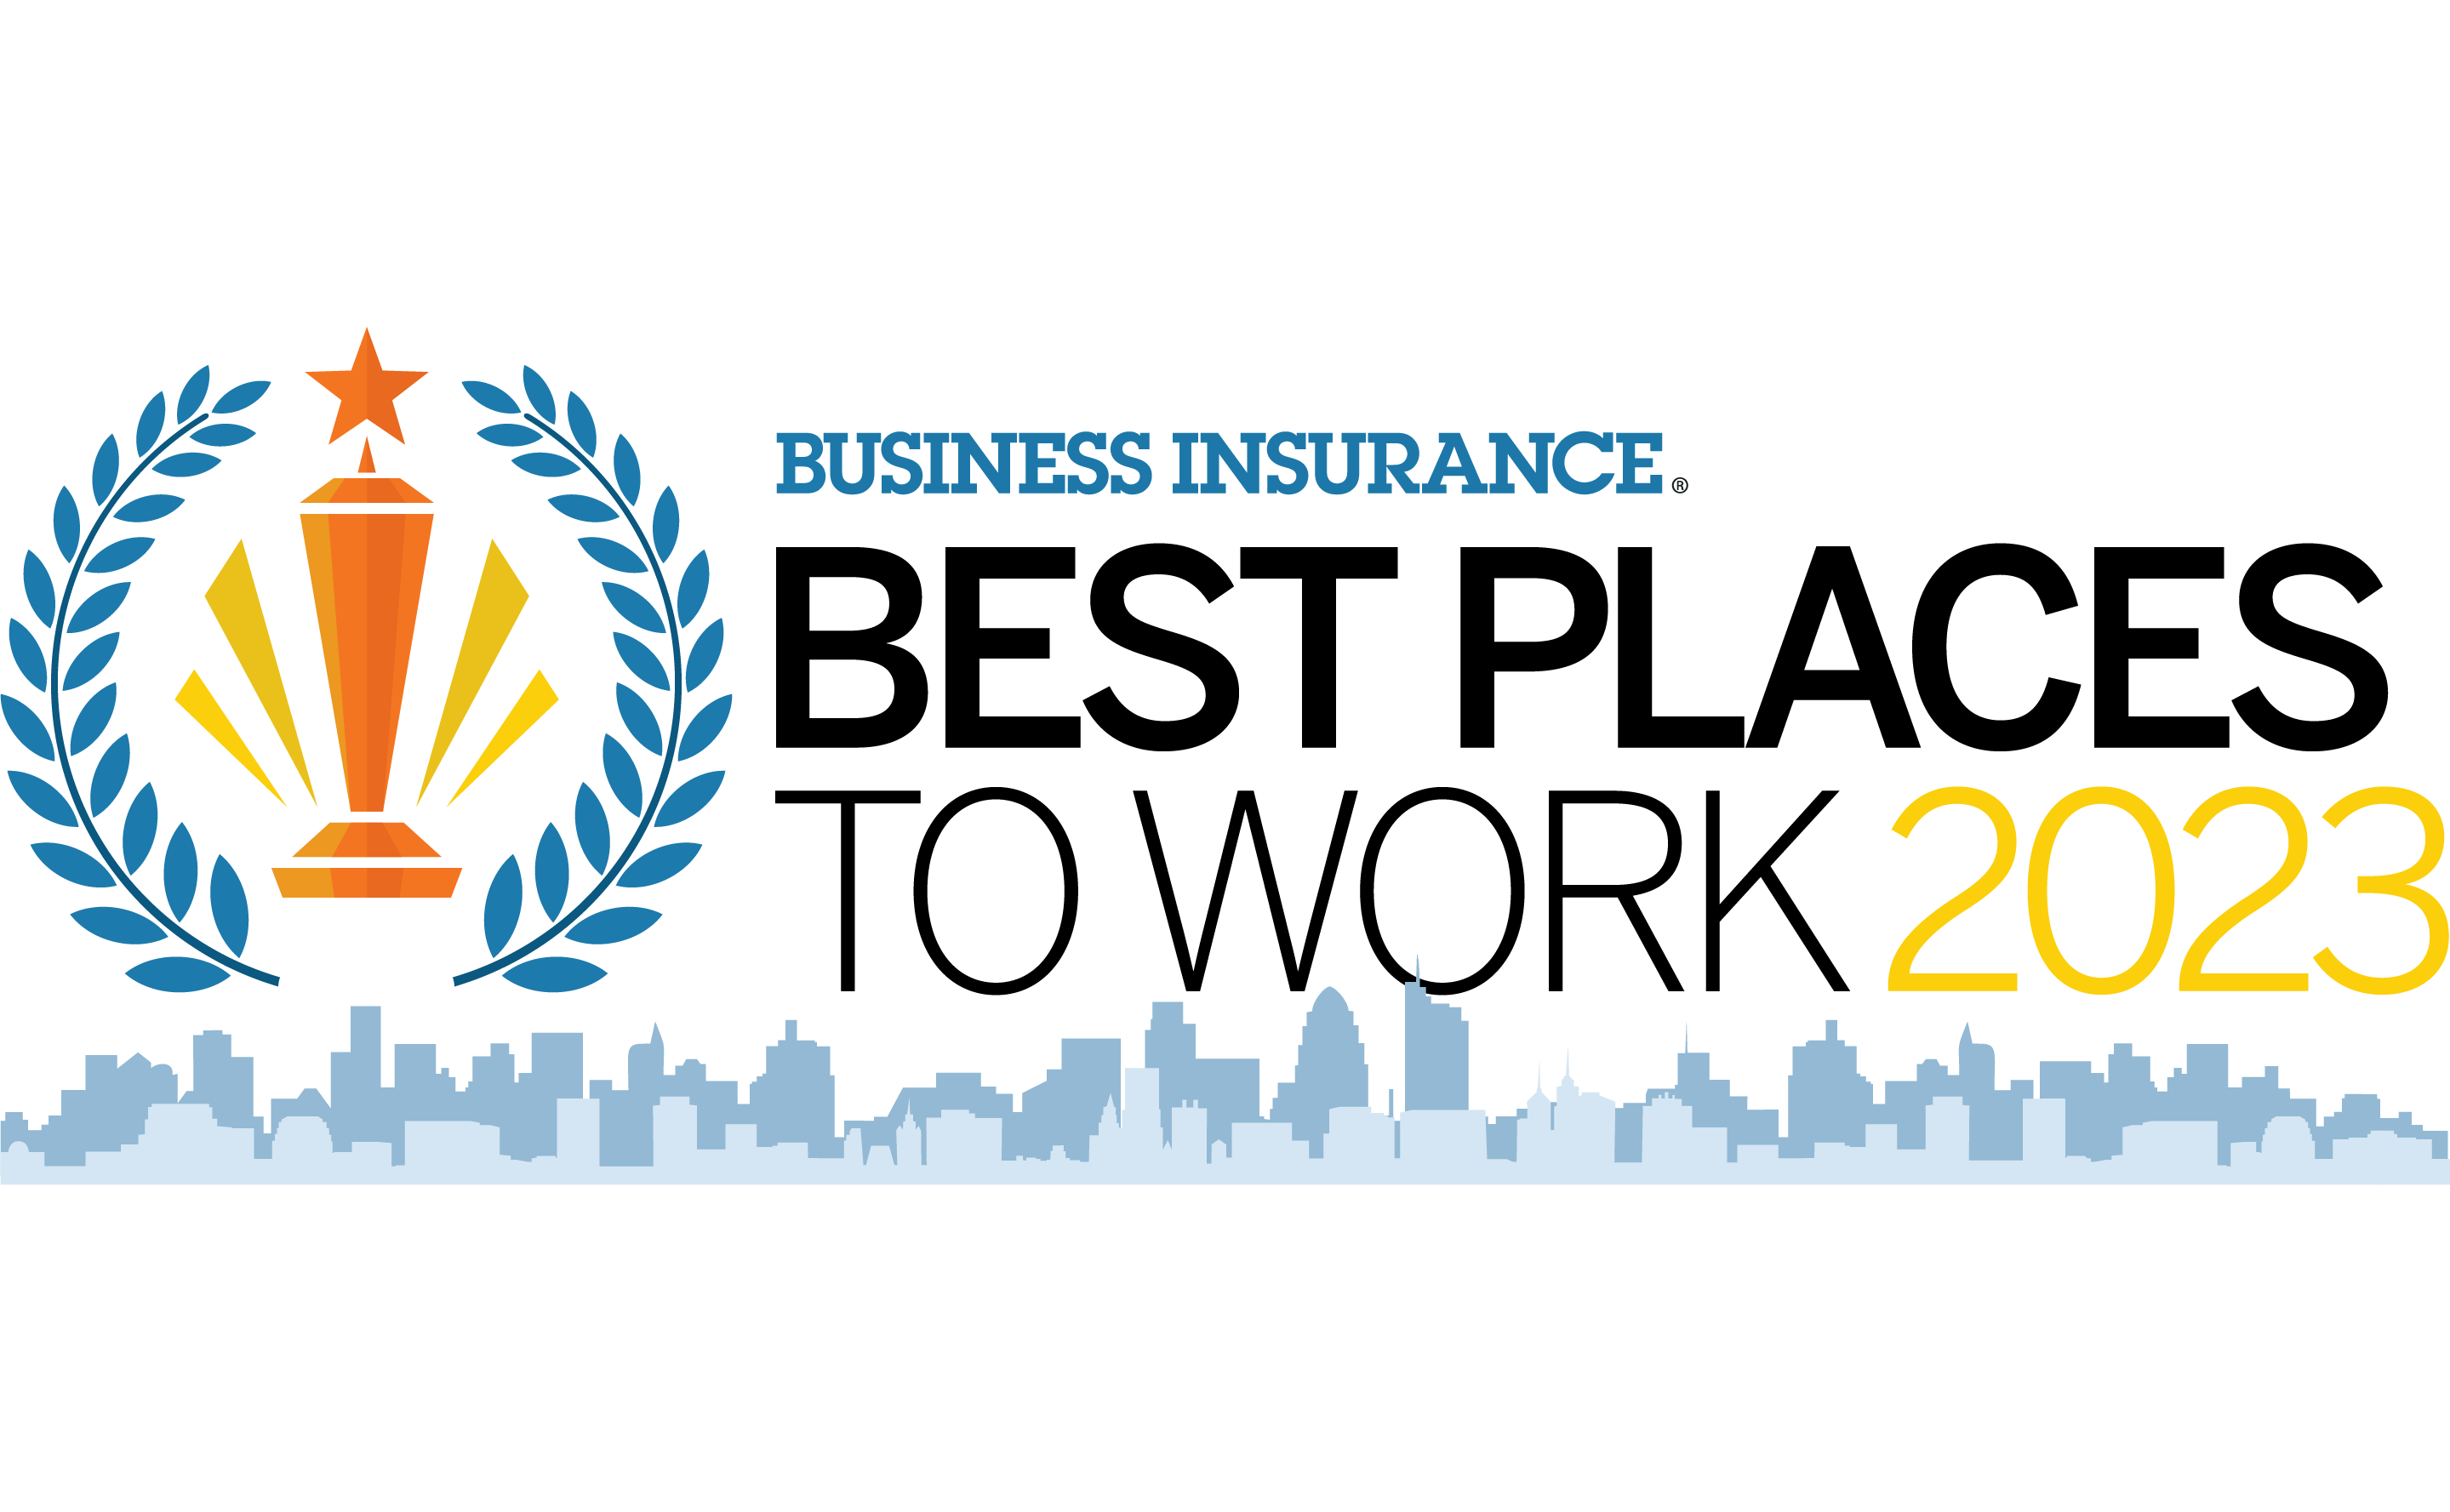 Business Insurance Best Places to Work 2023 award